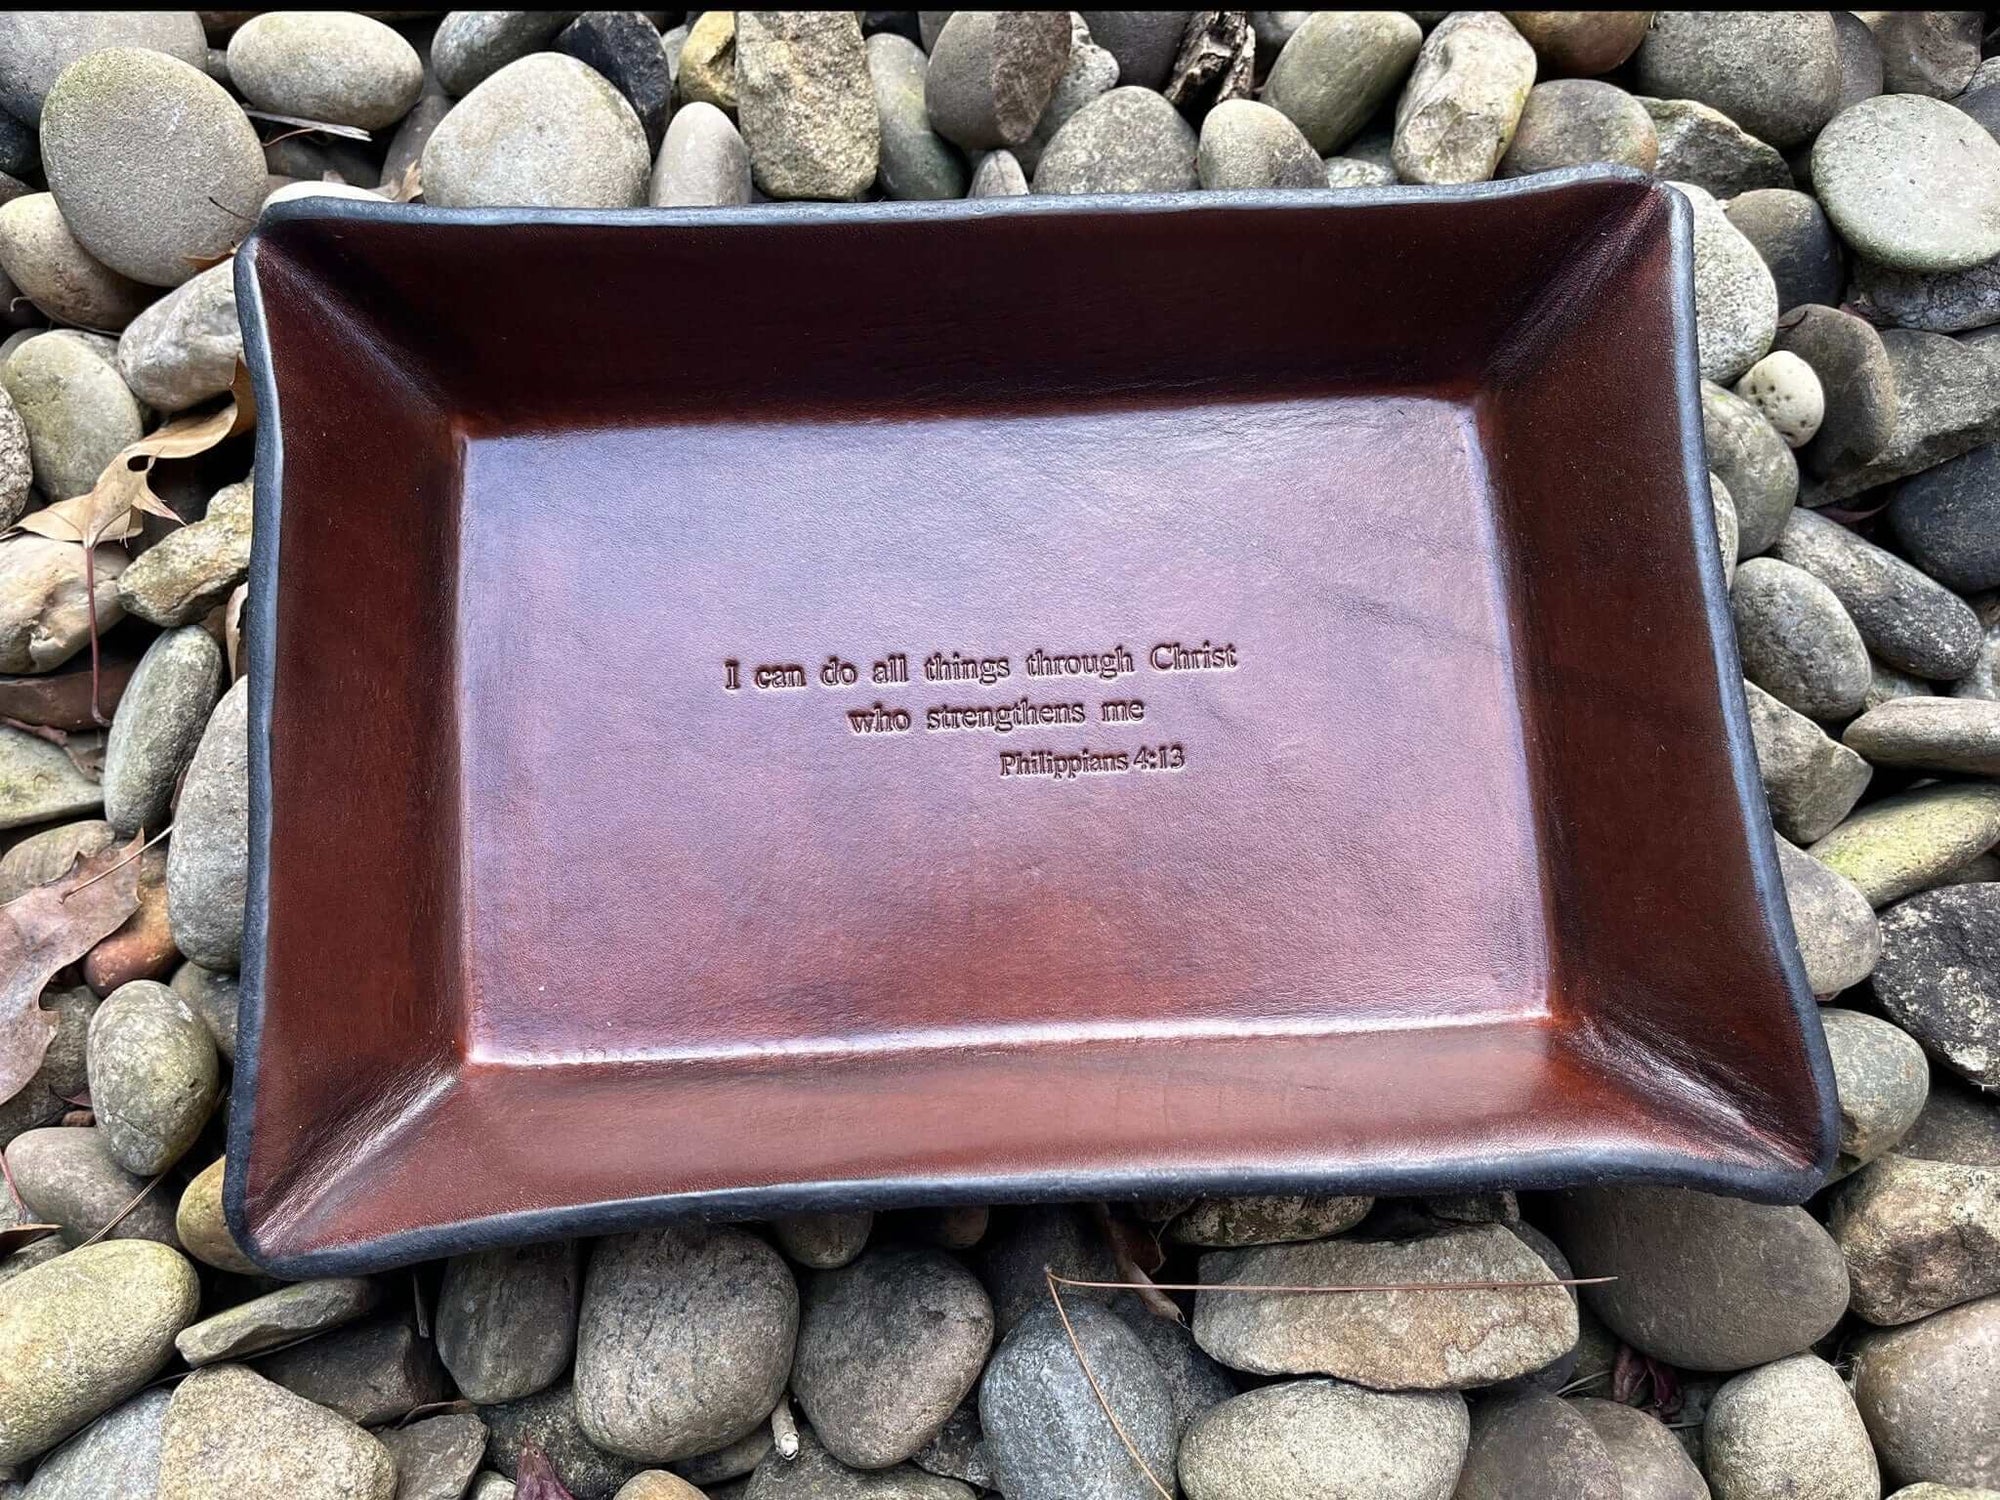 Philippians 4:13 rectangular leather valet tray.  Brown